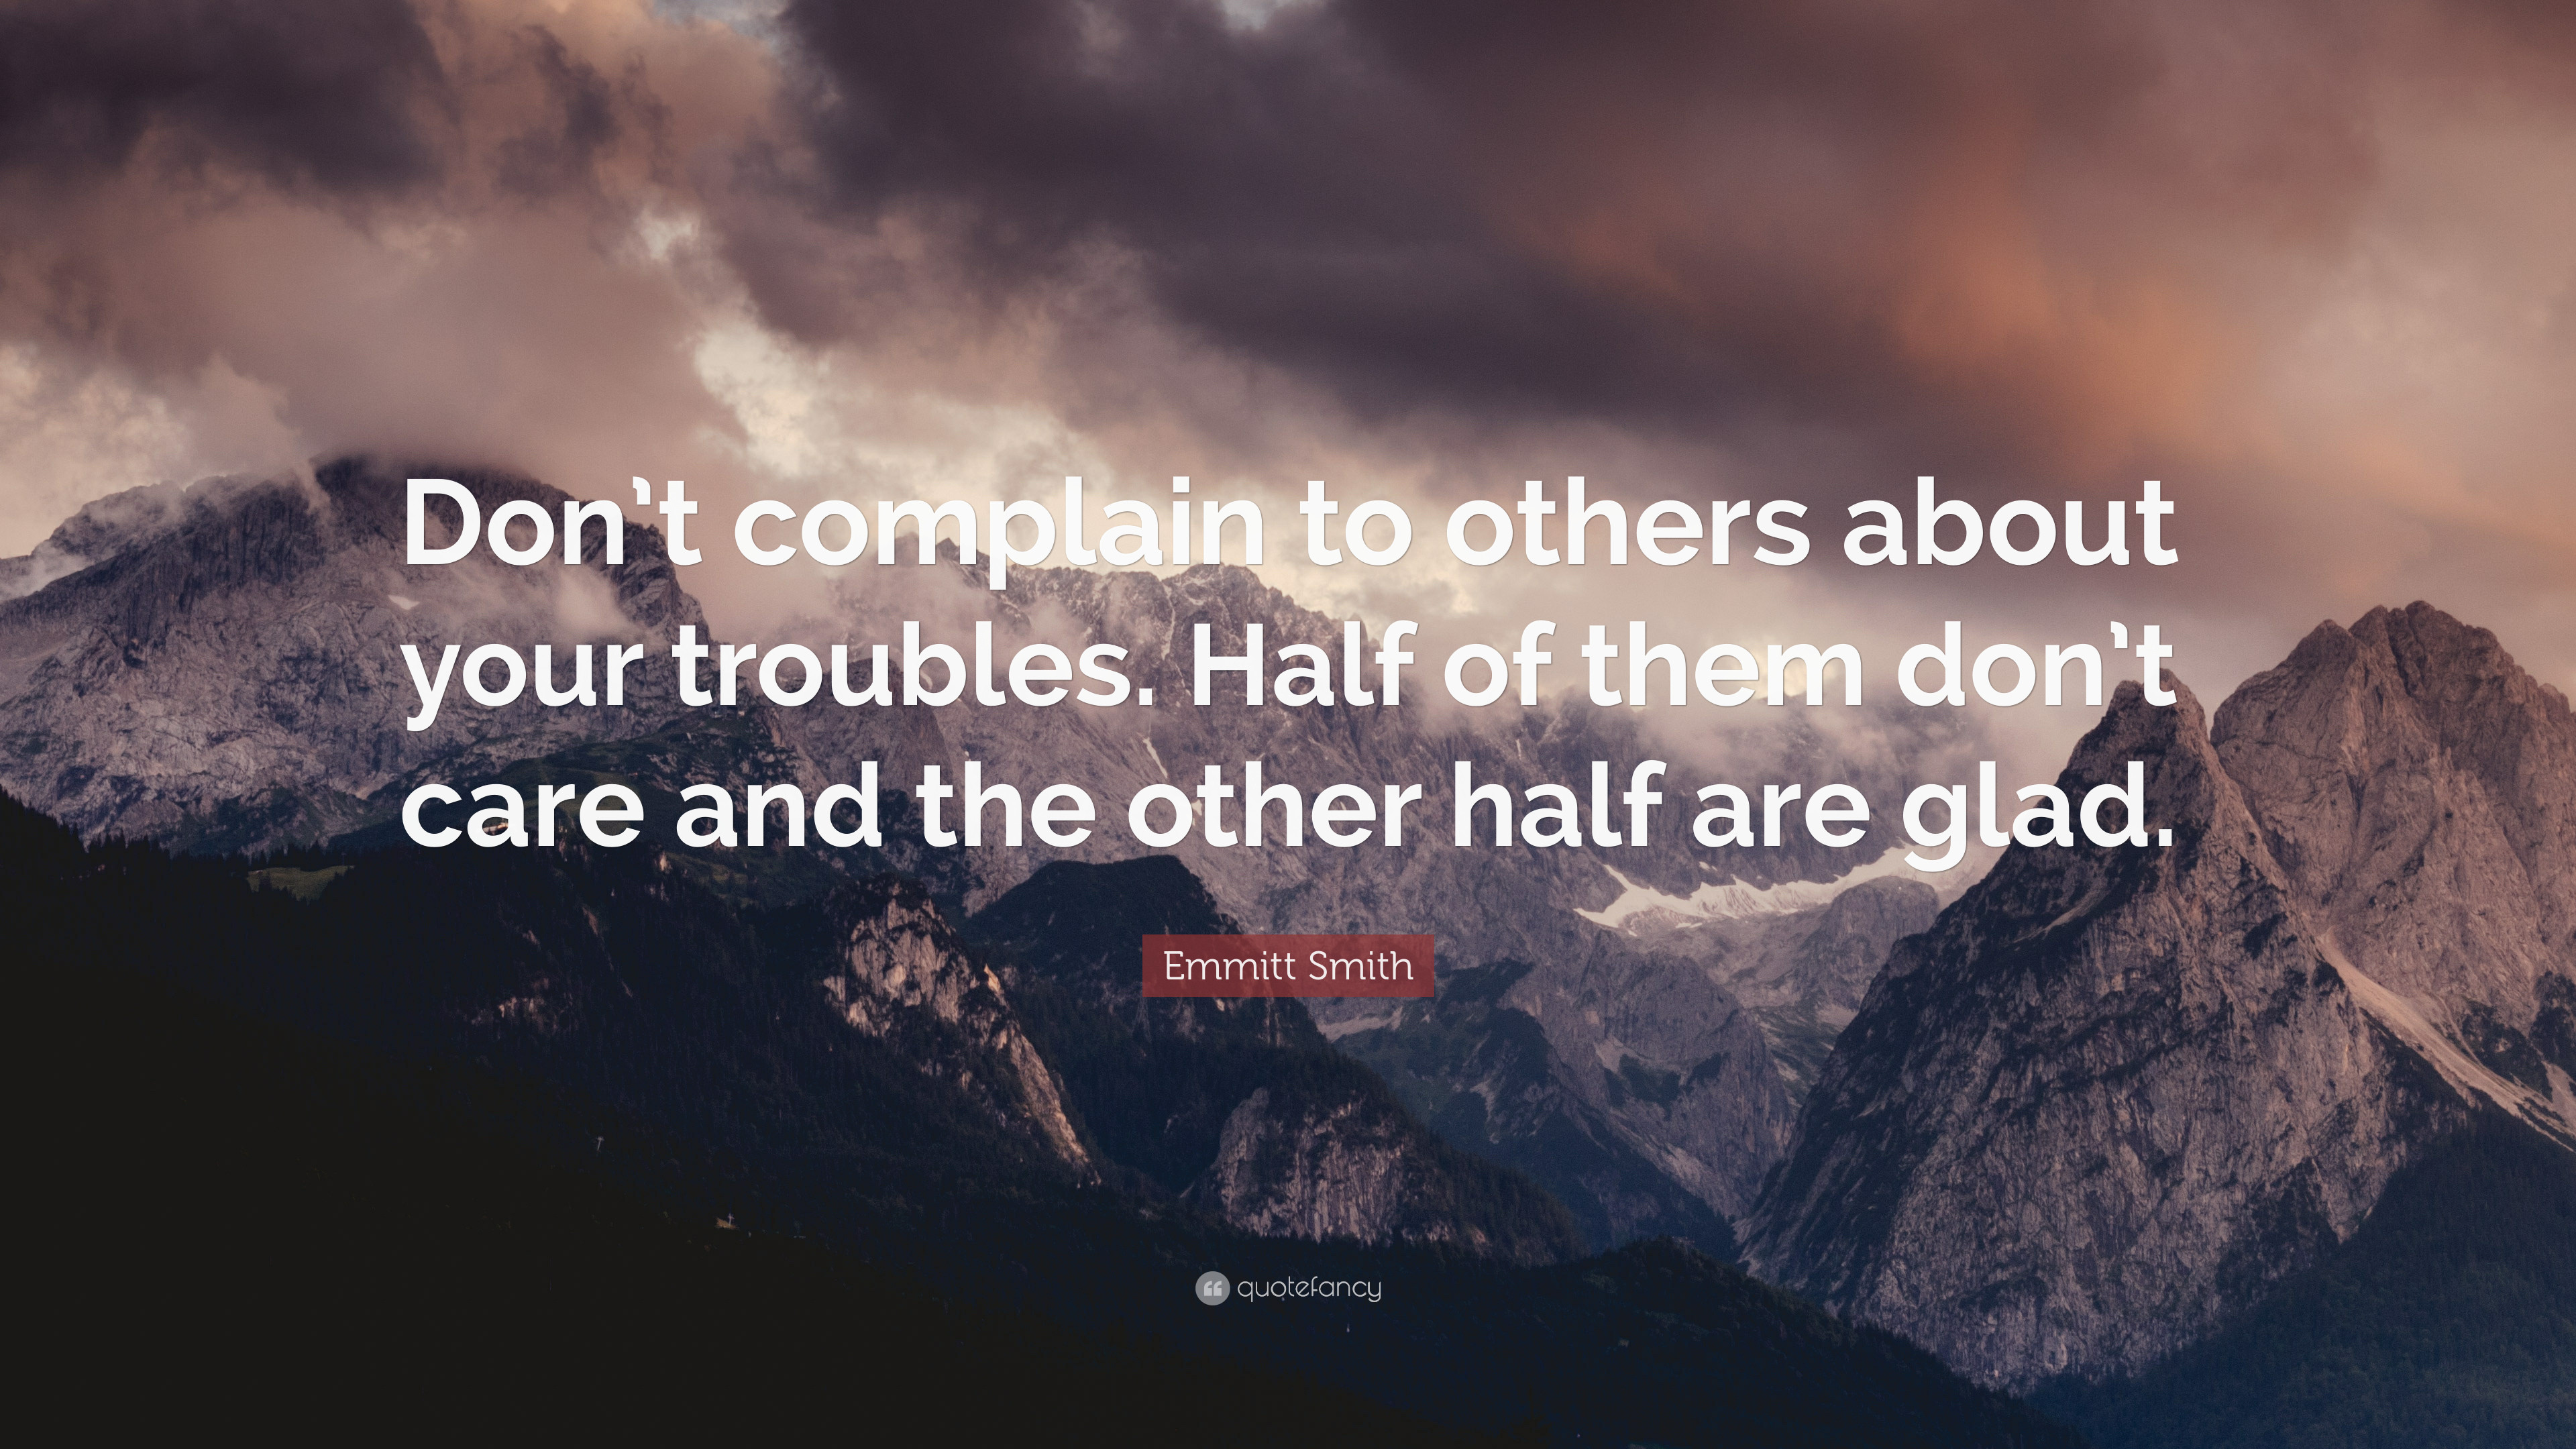 3840x2160 Emmitt Smith Quote: “Don't complain to others about your troubles. Half